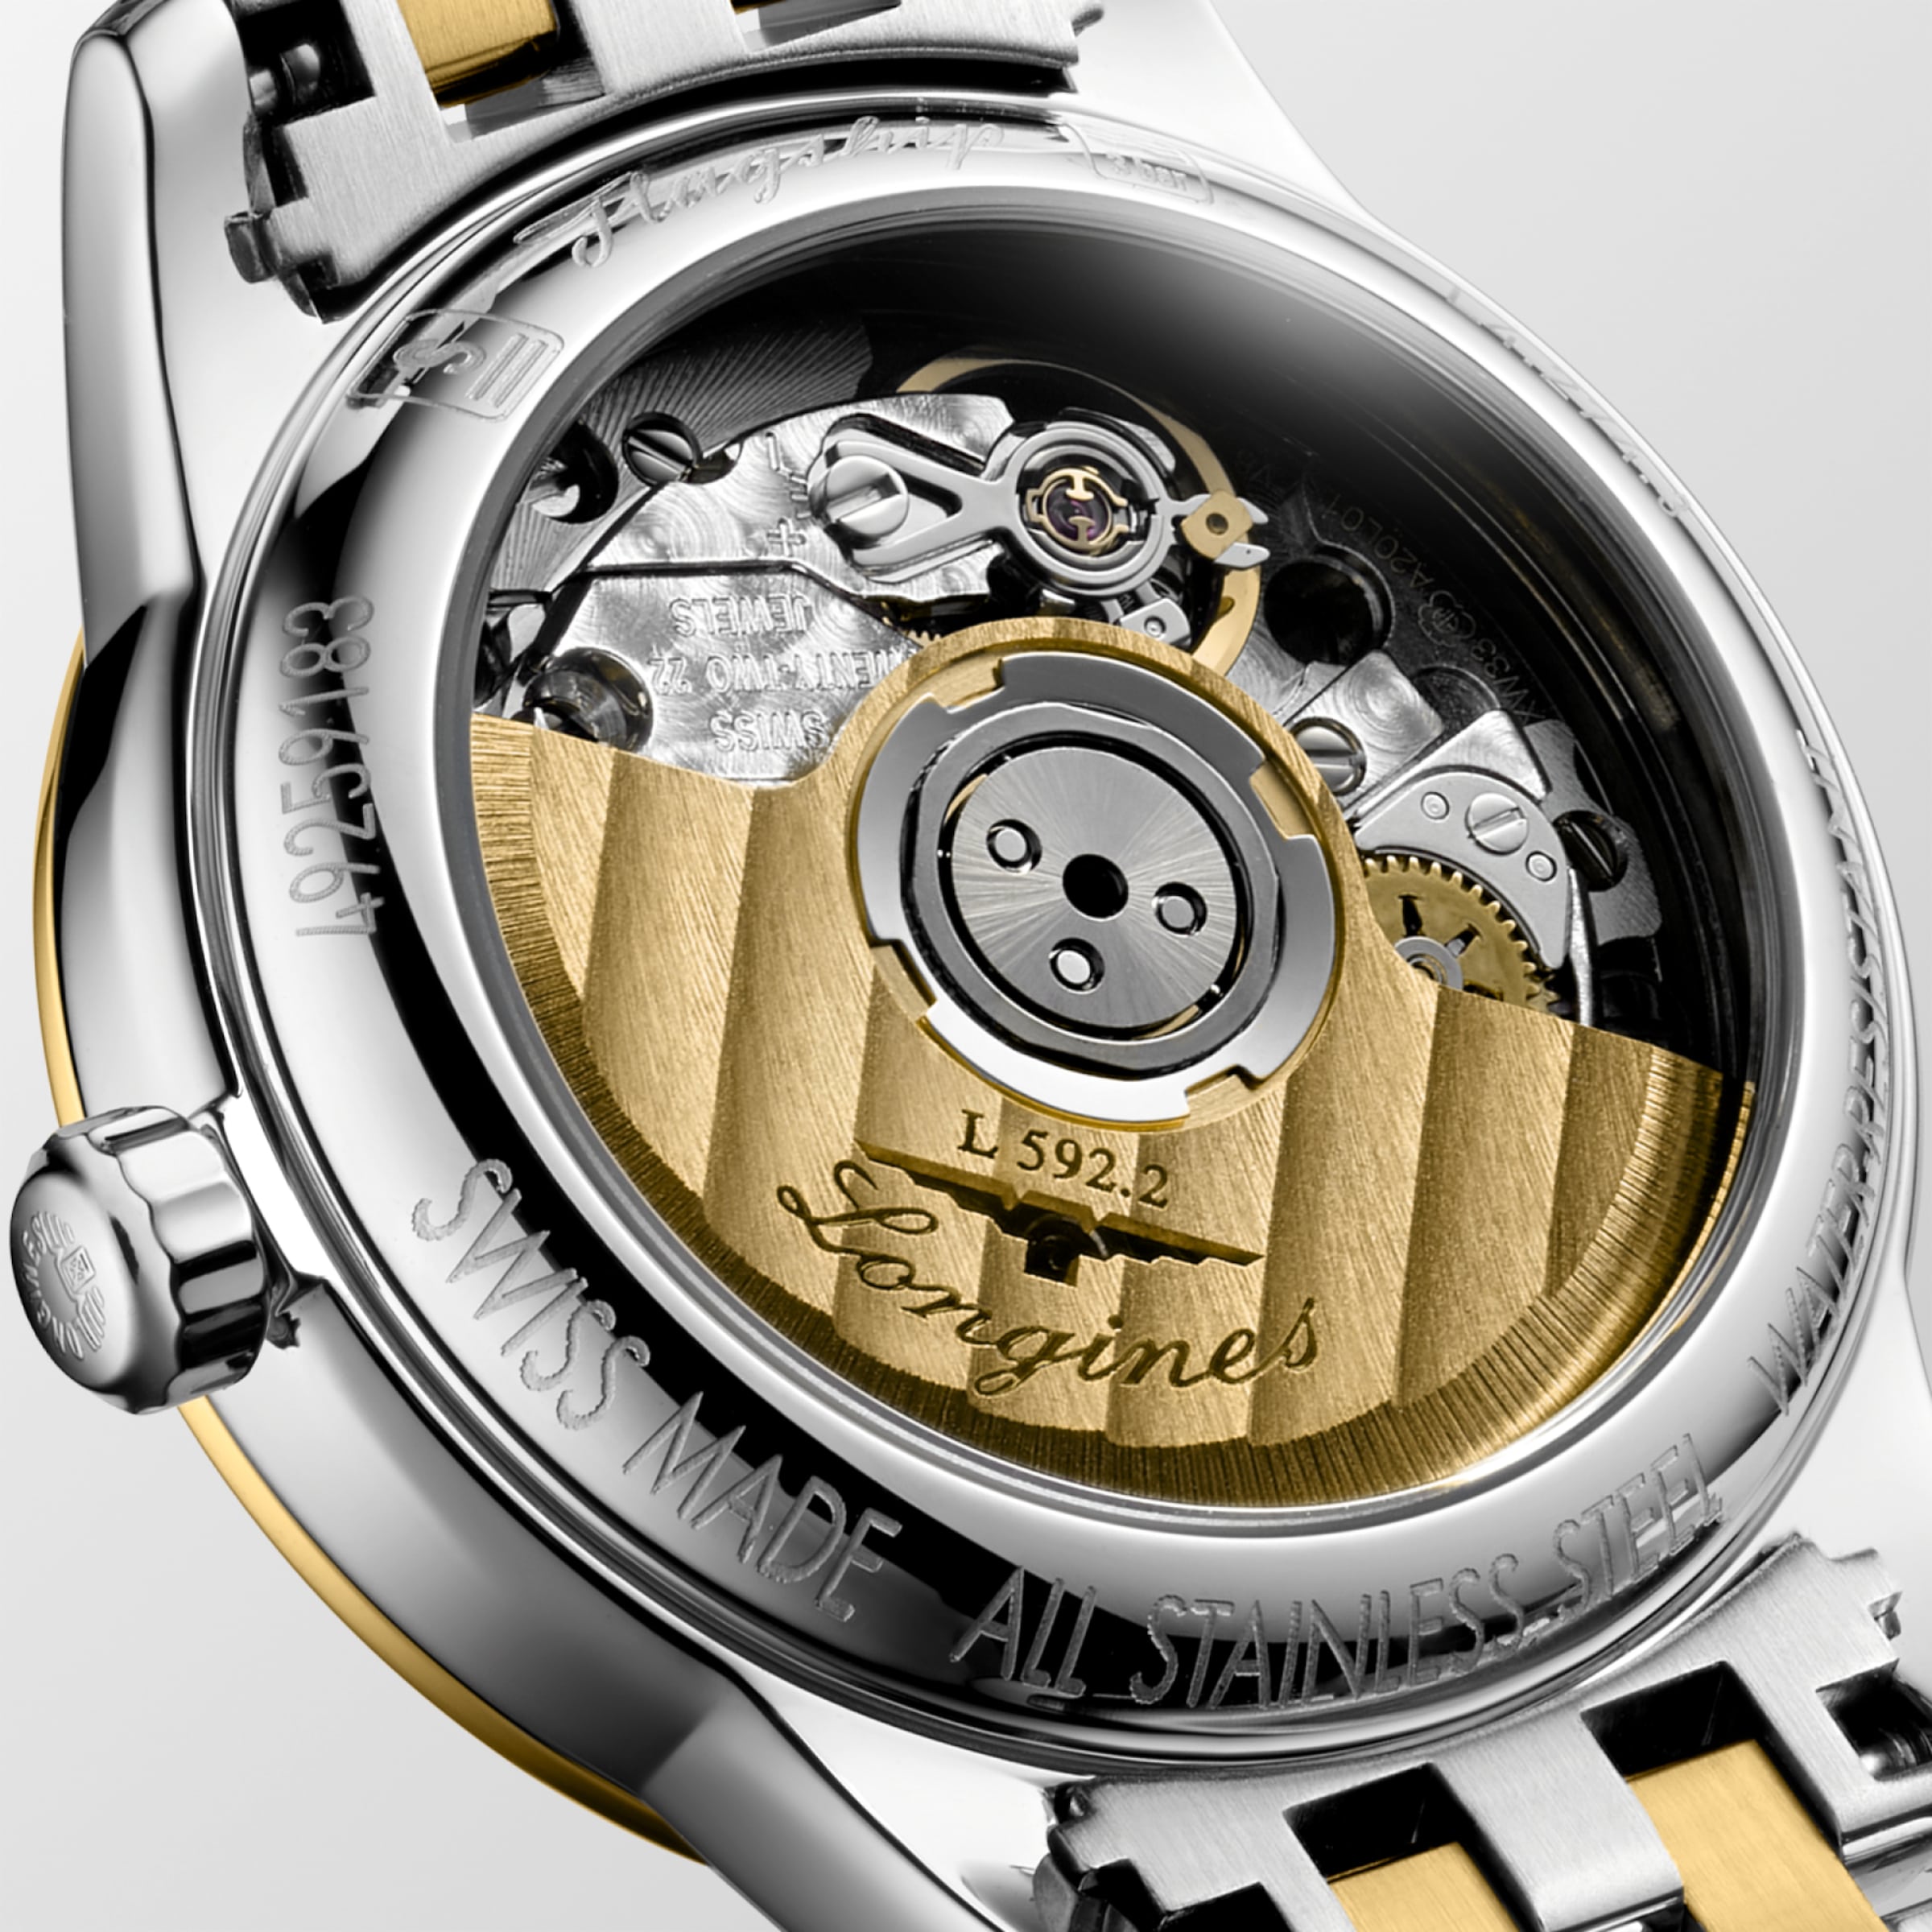 Longines FLAGSHIP Automatic Stainless steel and yellow PVD coating Watch - L4.274.3.21.7